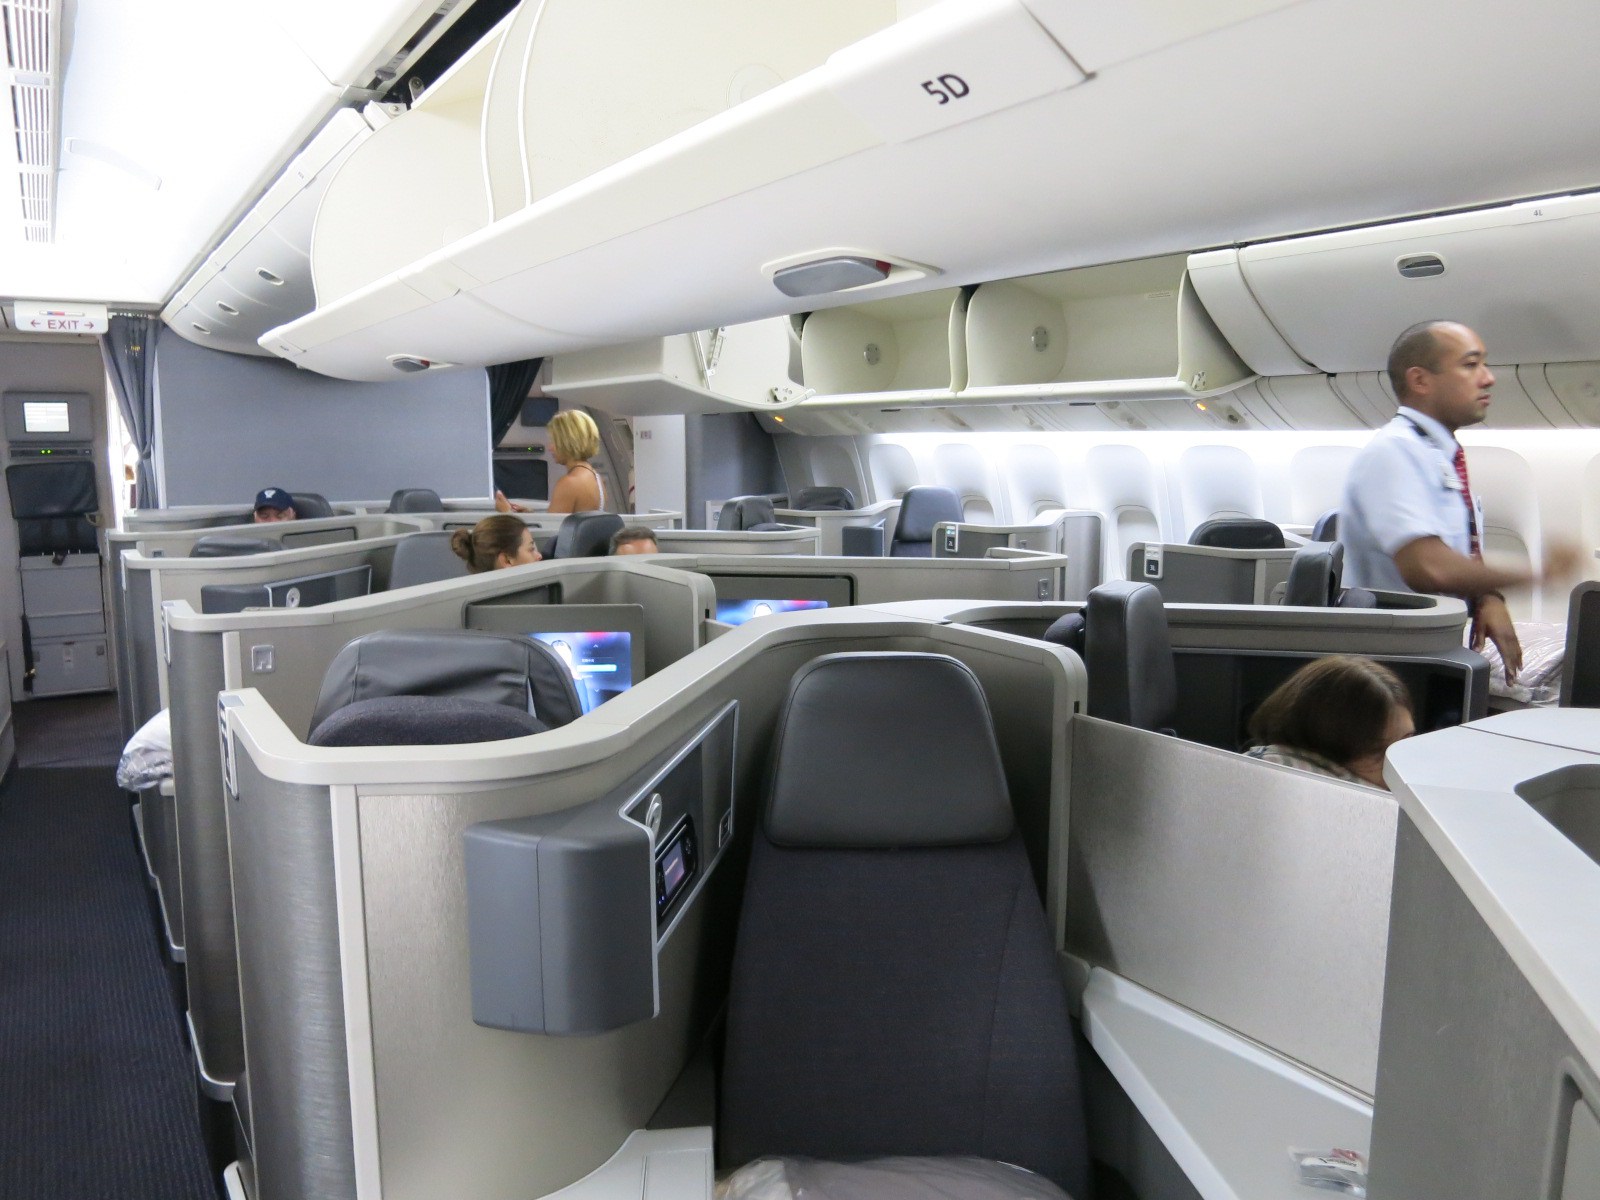 American Airlines Is the Latest Airline to Update Family Seating Policy